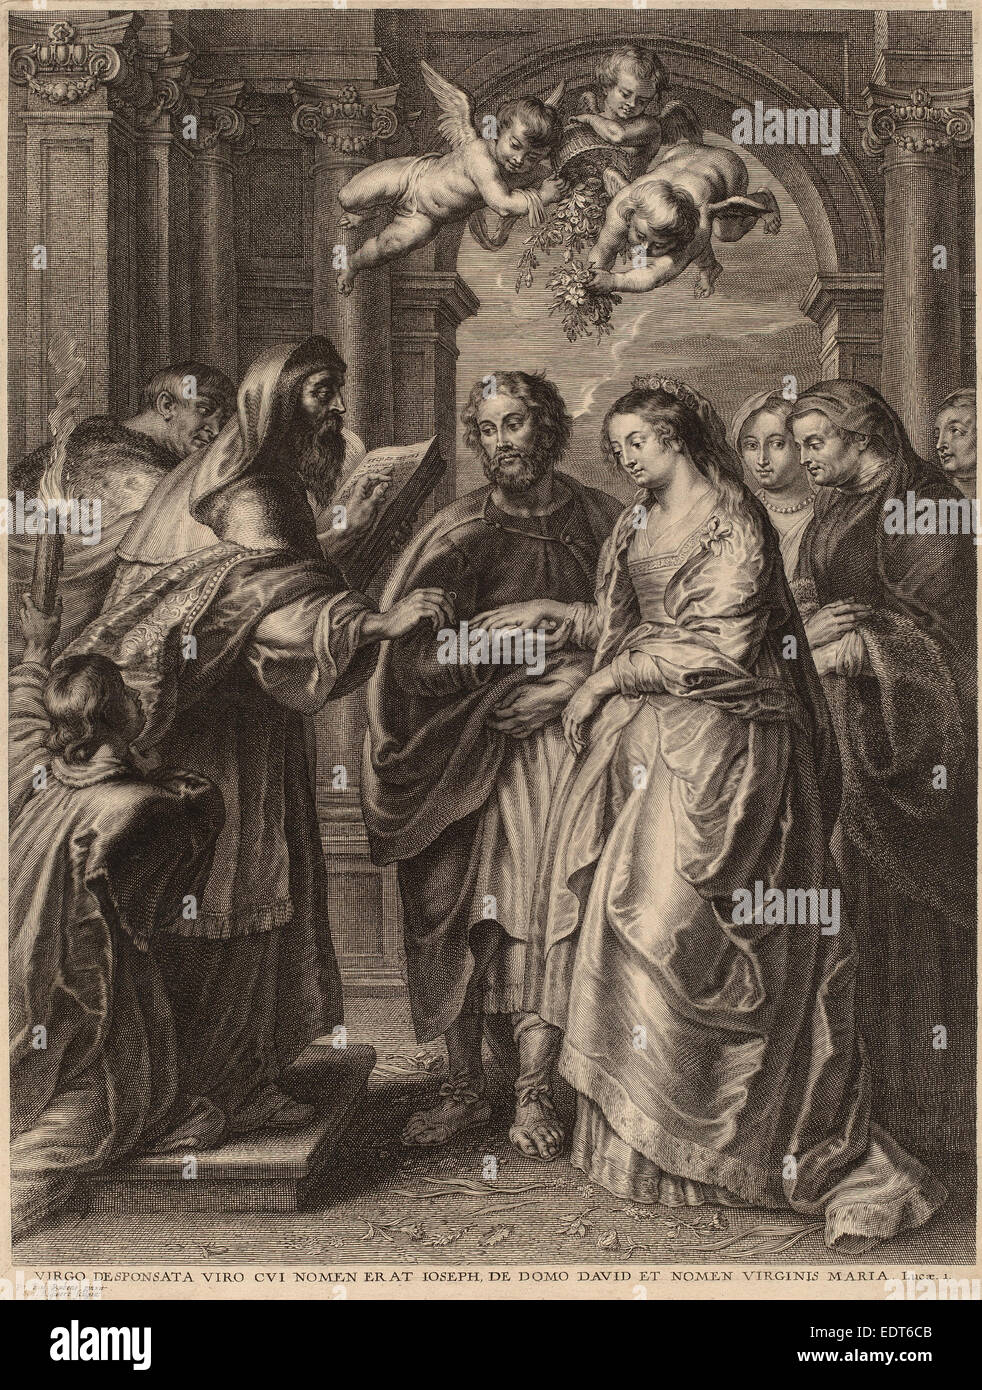 Schelte Adams Bolswert after Sir Peter Paul Rubens (Flemish, 1586 - 1659), The Marriage of the Virgin, engraving Stock Photo